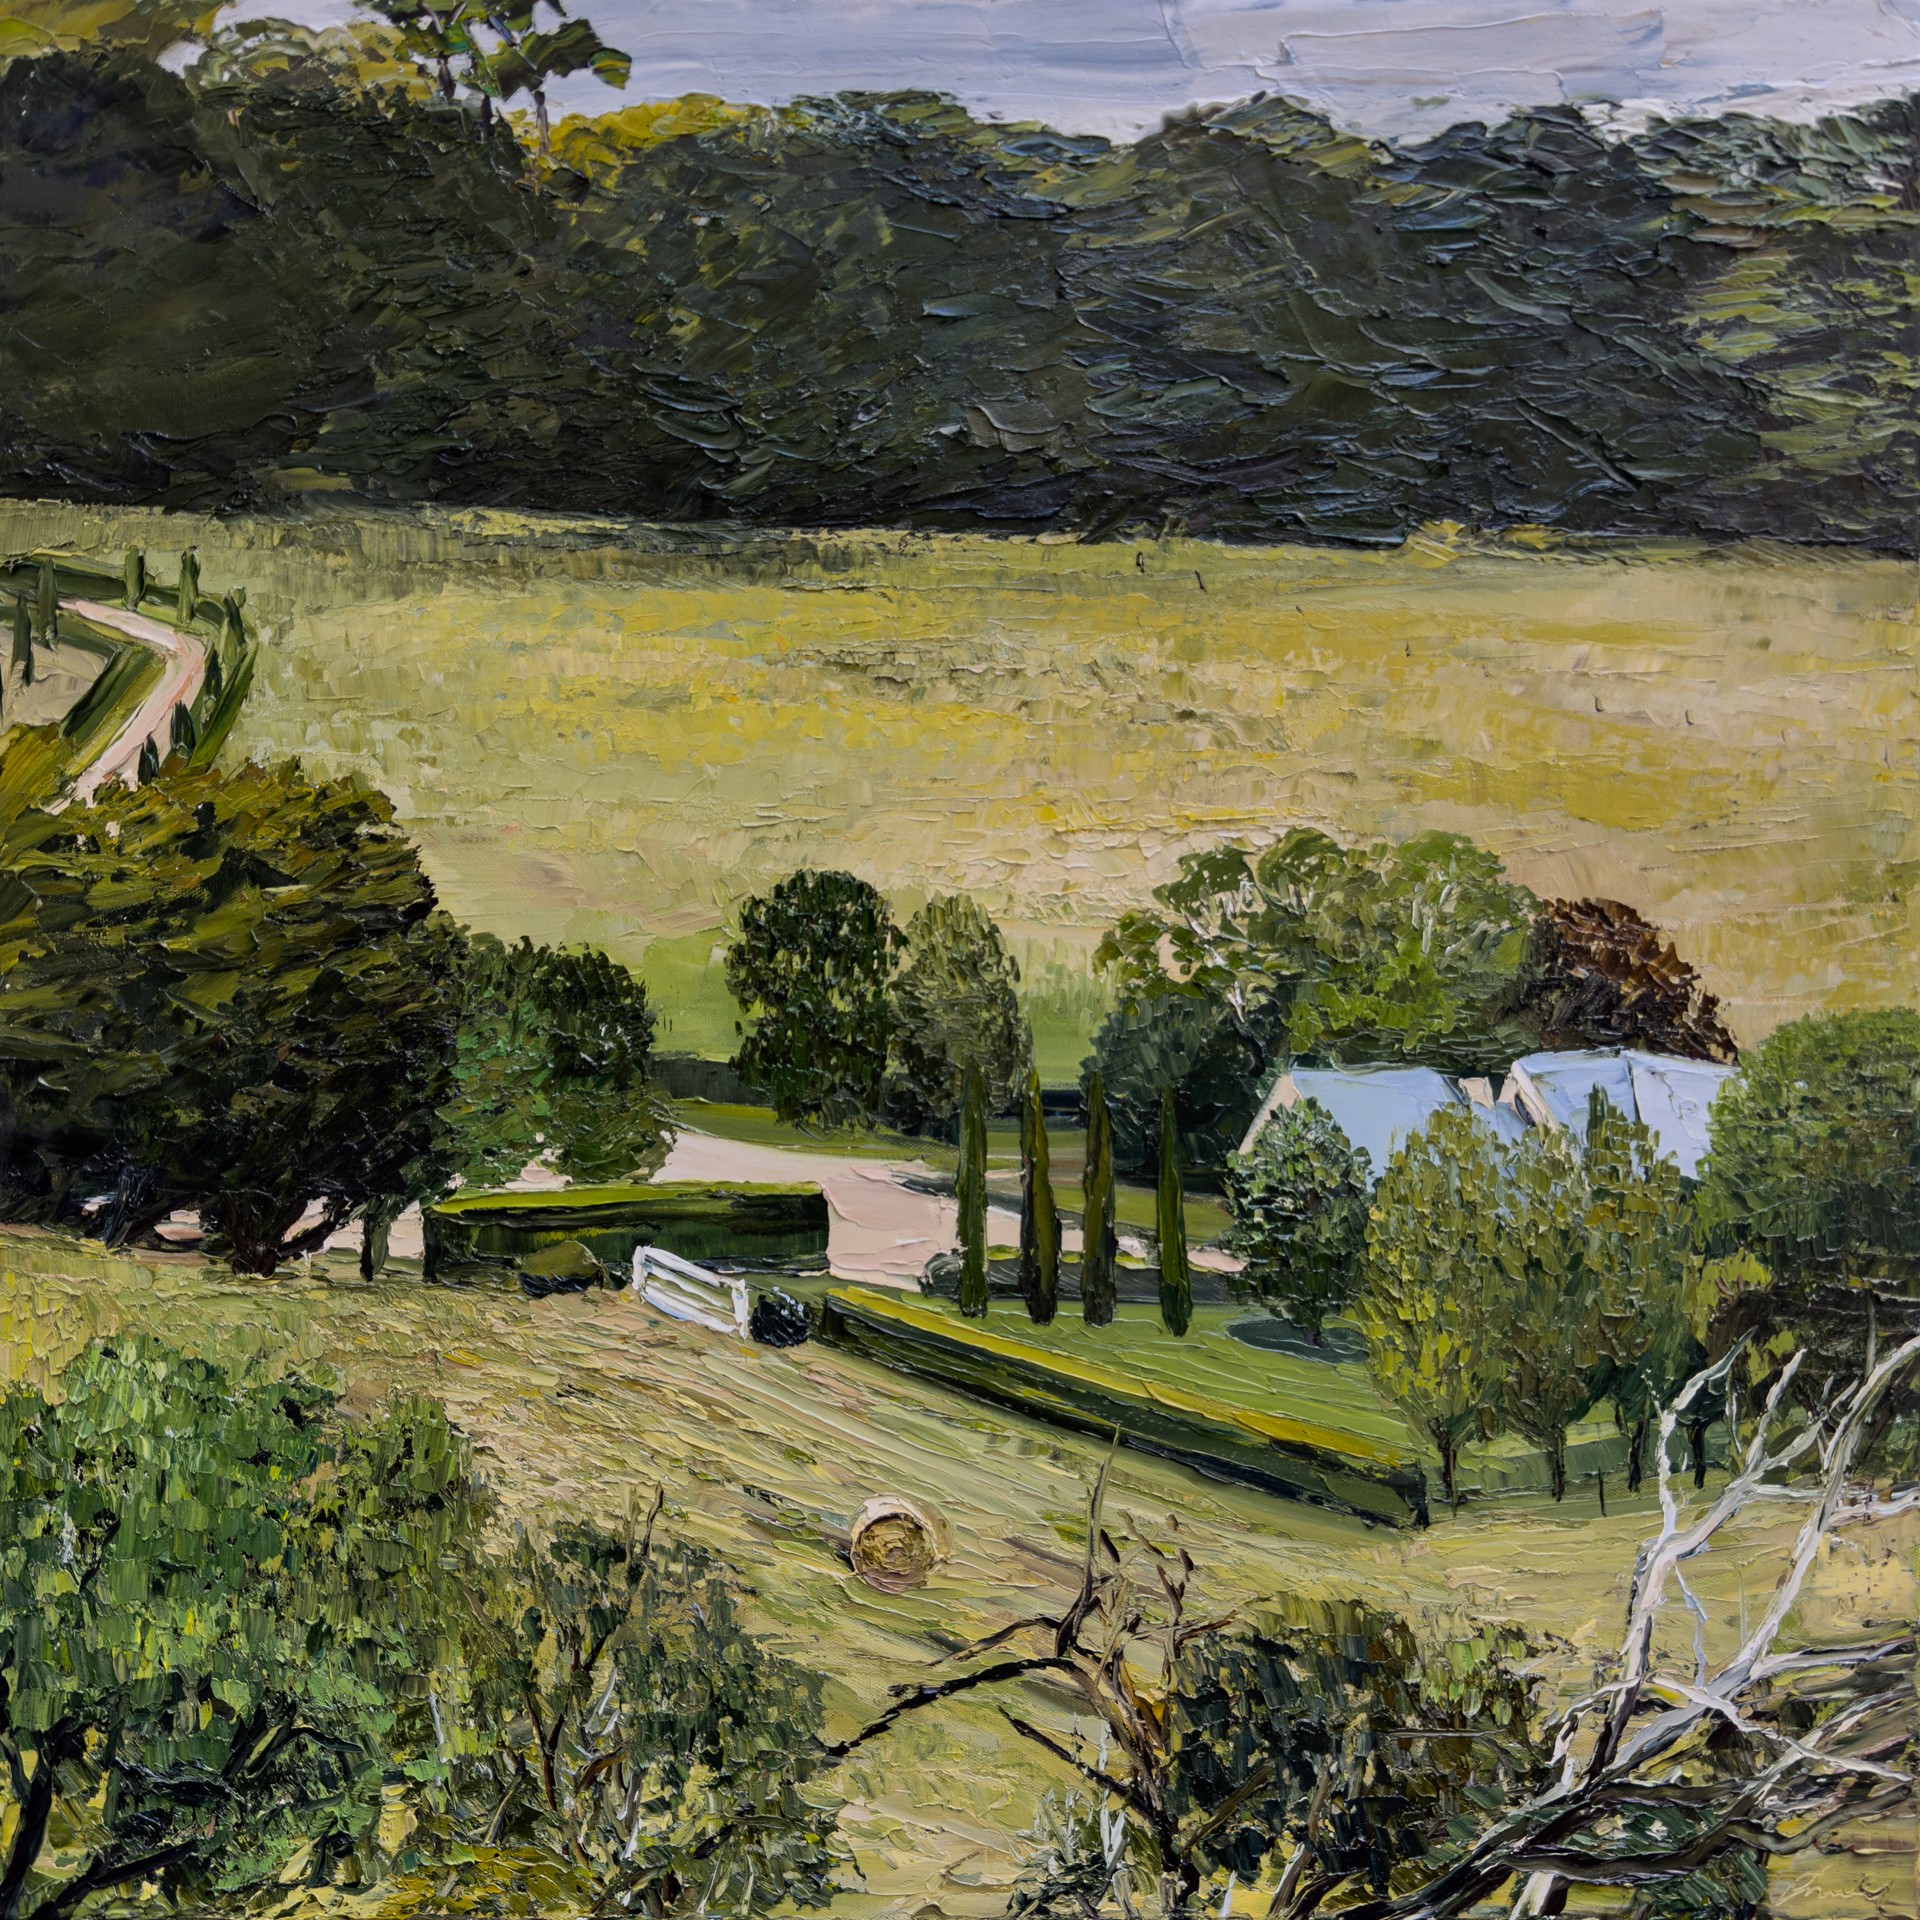 Warm Summer Days on Beechers Way (Flinders, VIC) by Emily Persson